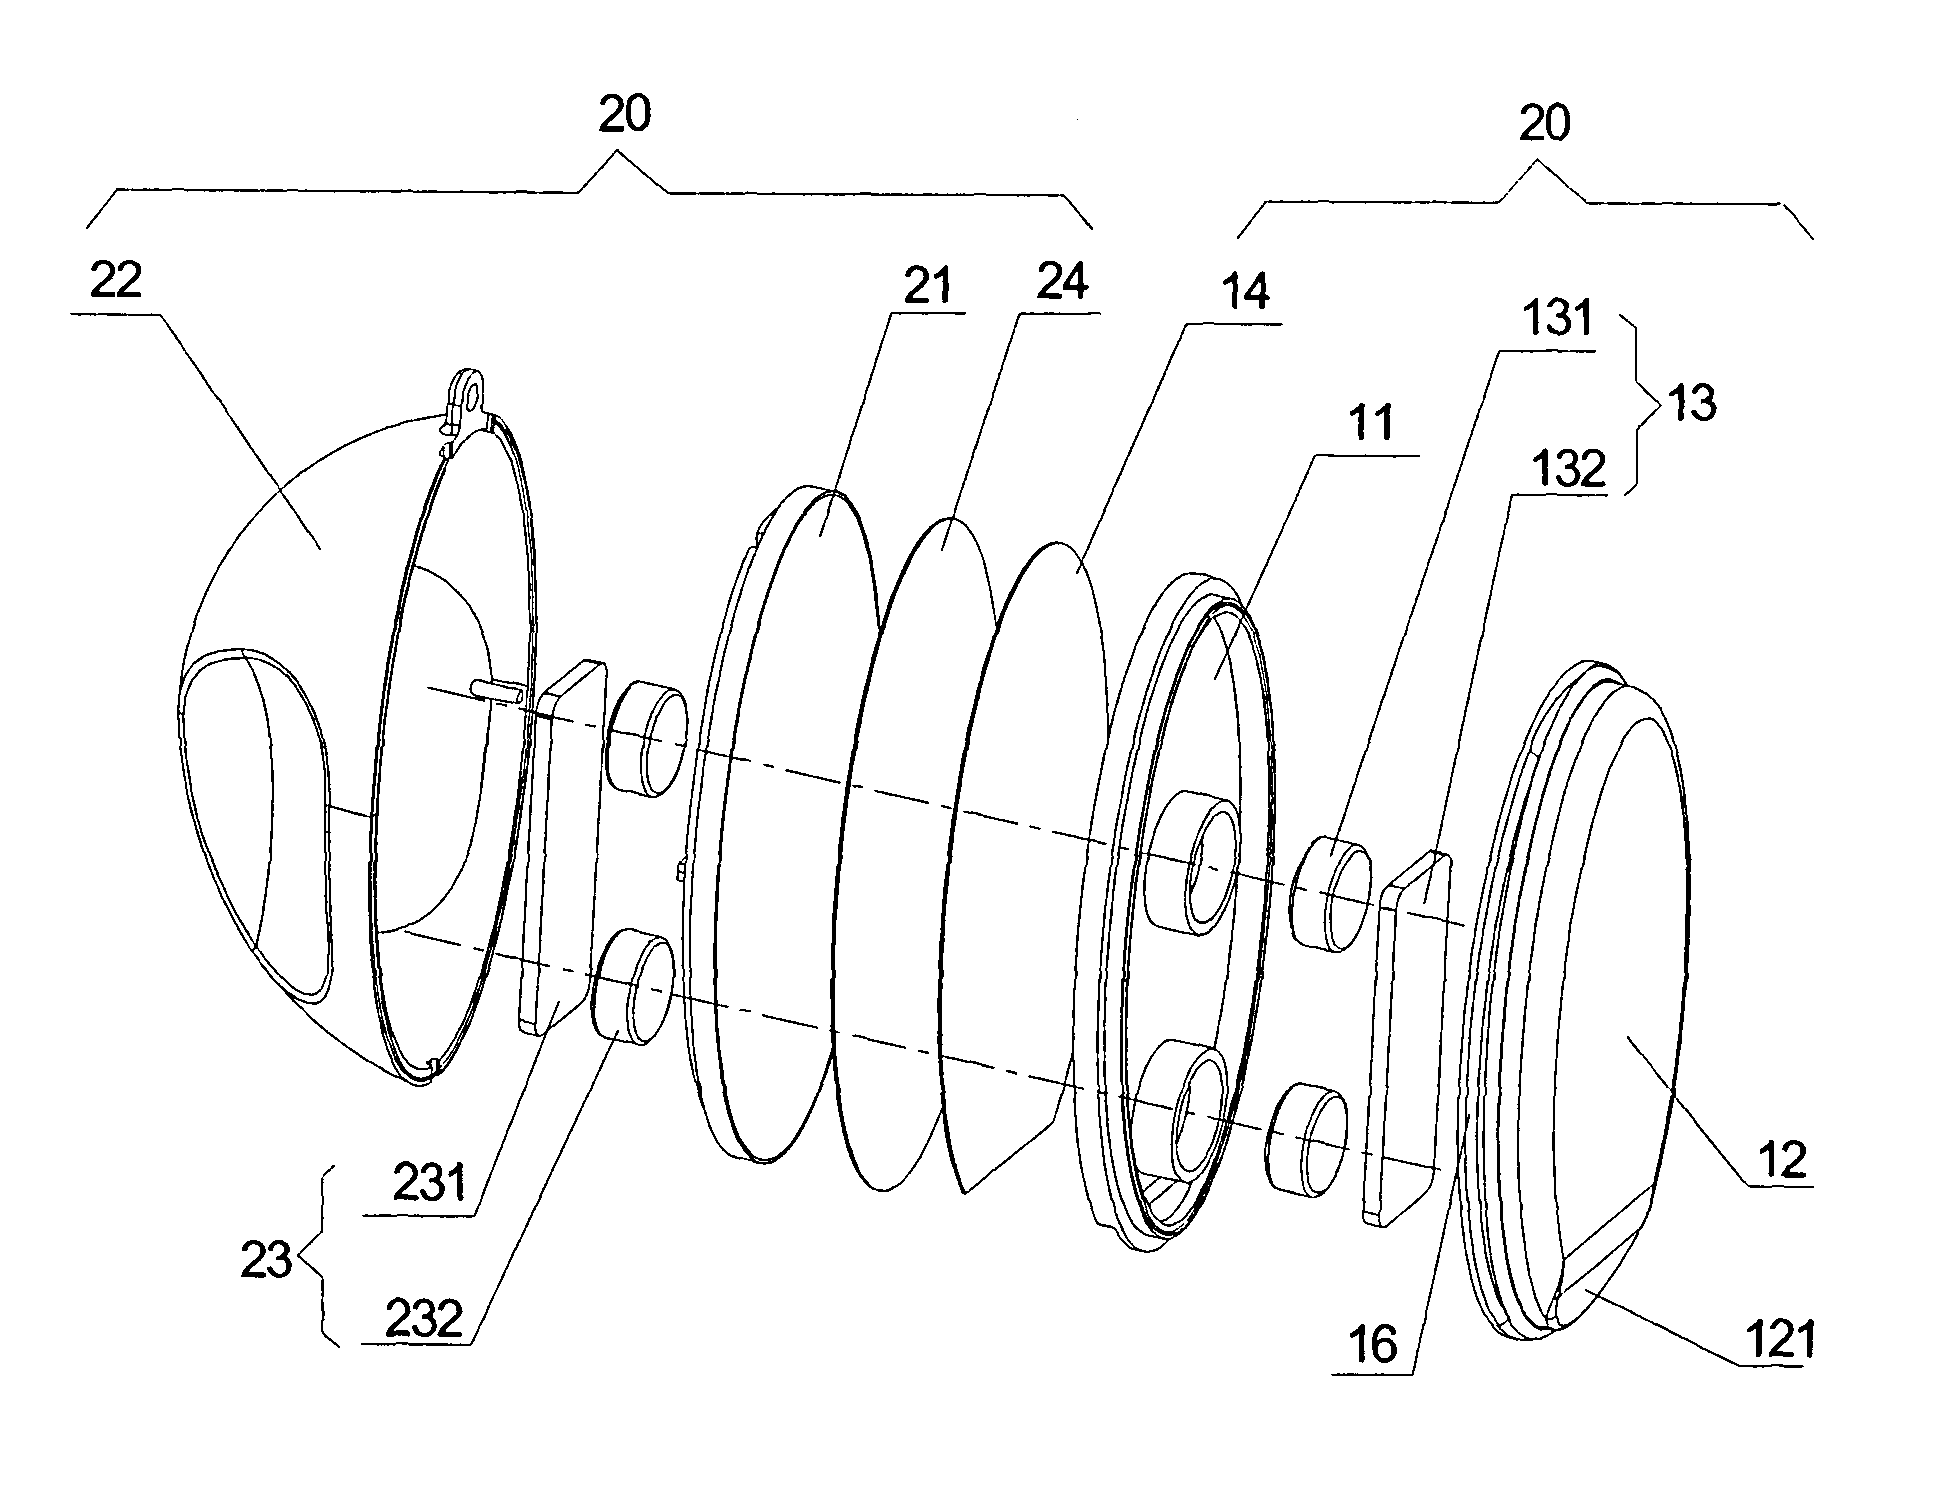 Magnetic scrubber assembly and design method